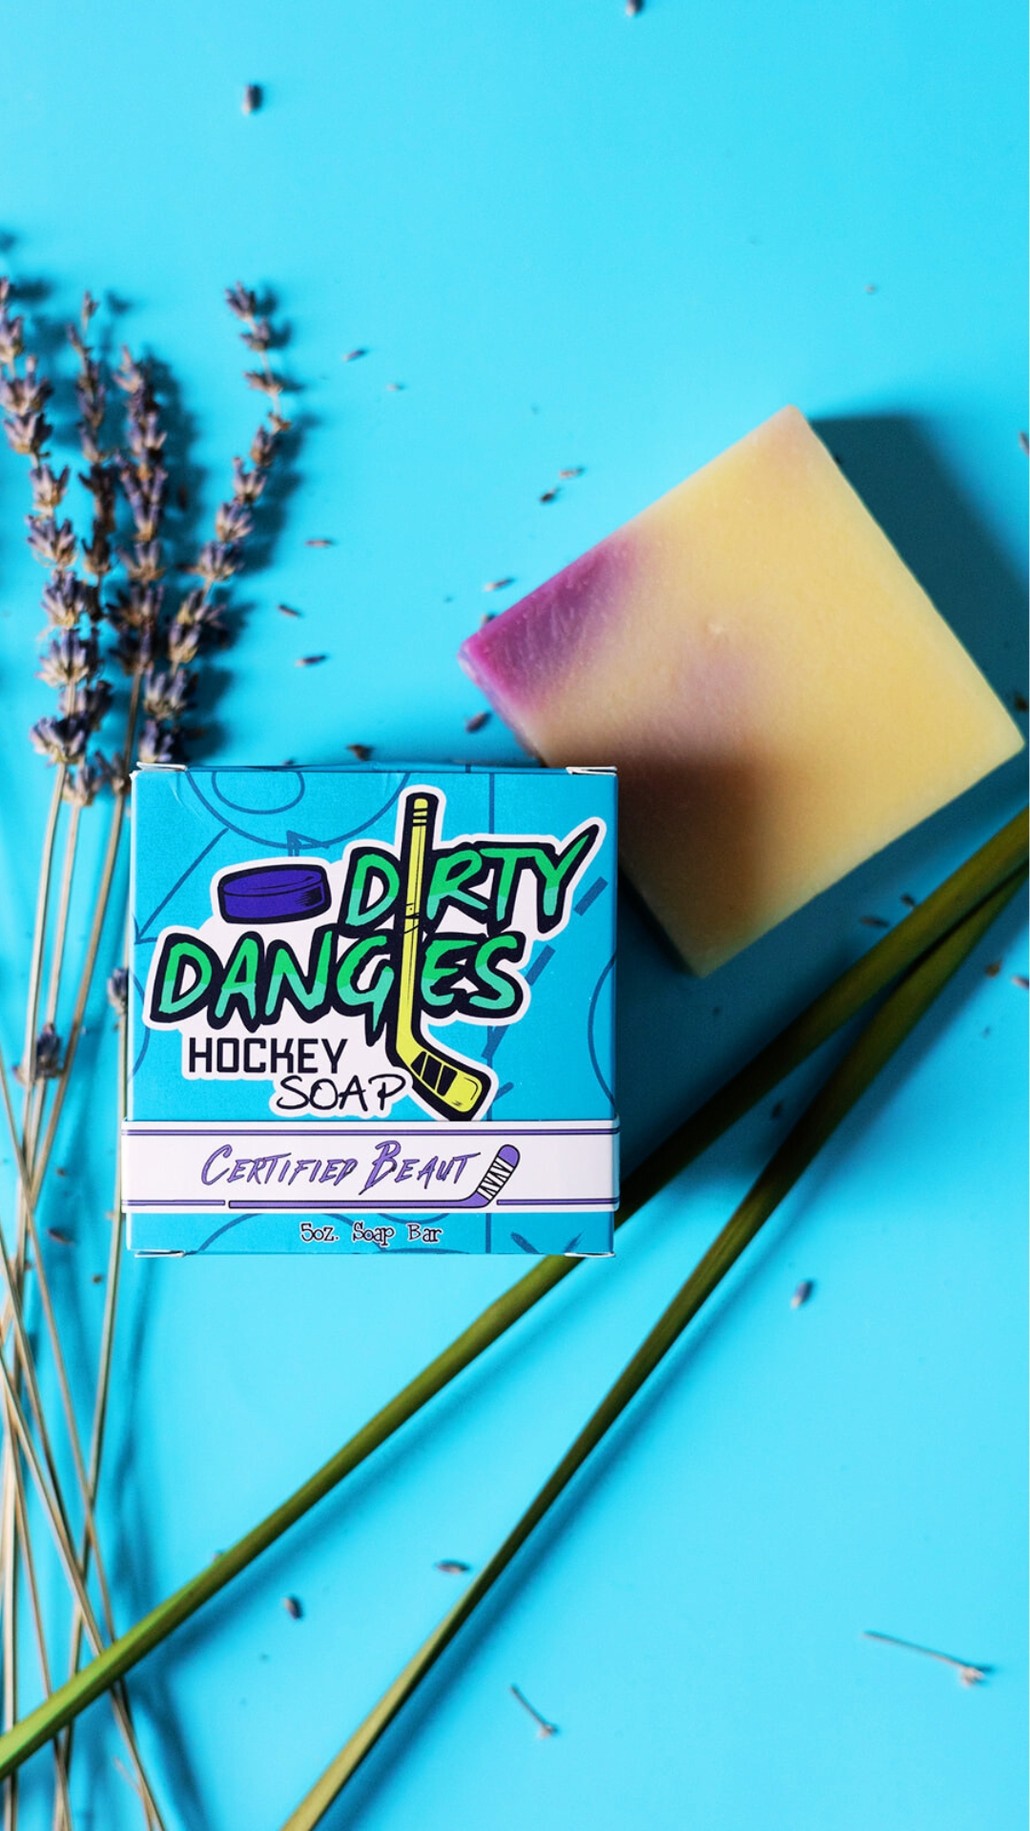 A purple and yellow bar of dirty dangles hockey soap on a lemongrass.